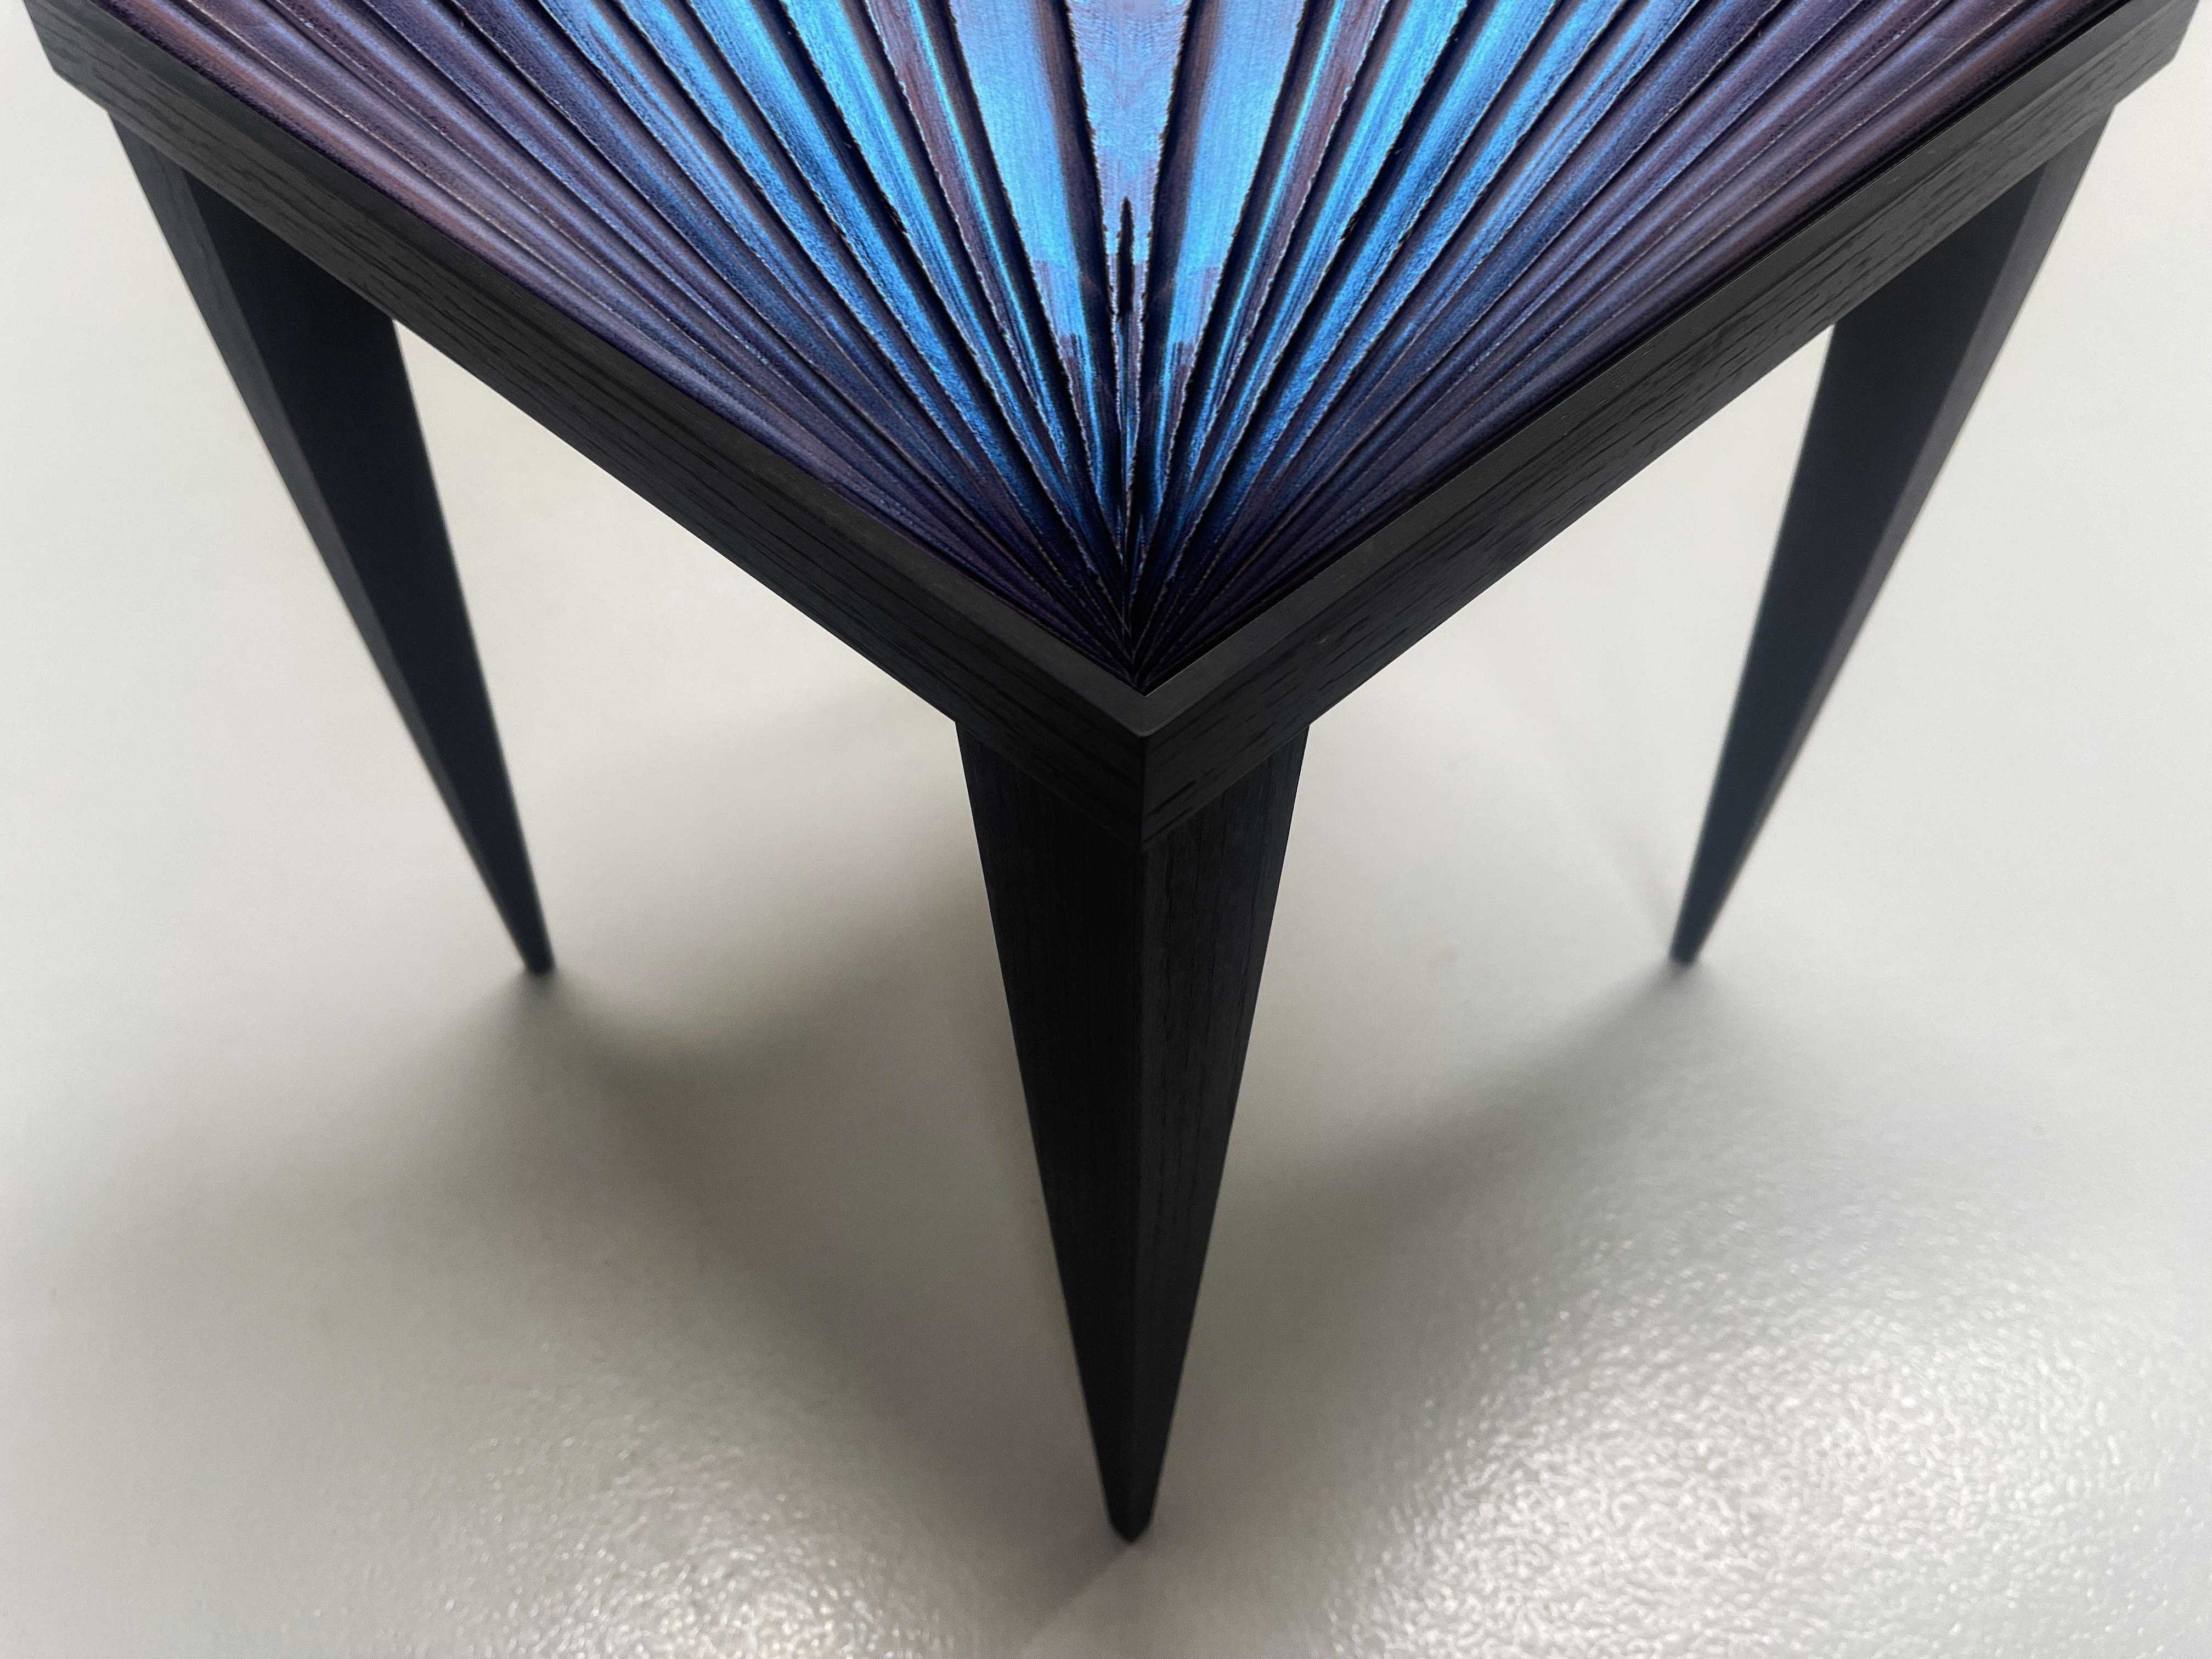 Italian Contemporary ‘Square’ Table Blue Crystal and Oak Wood Handmade by Ghirò Studio For Sale